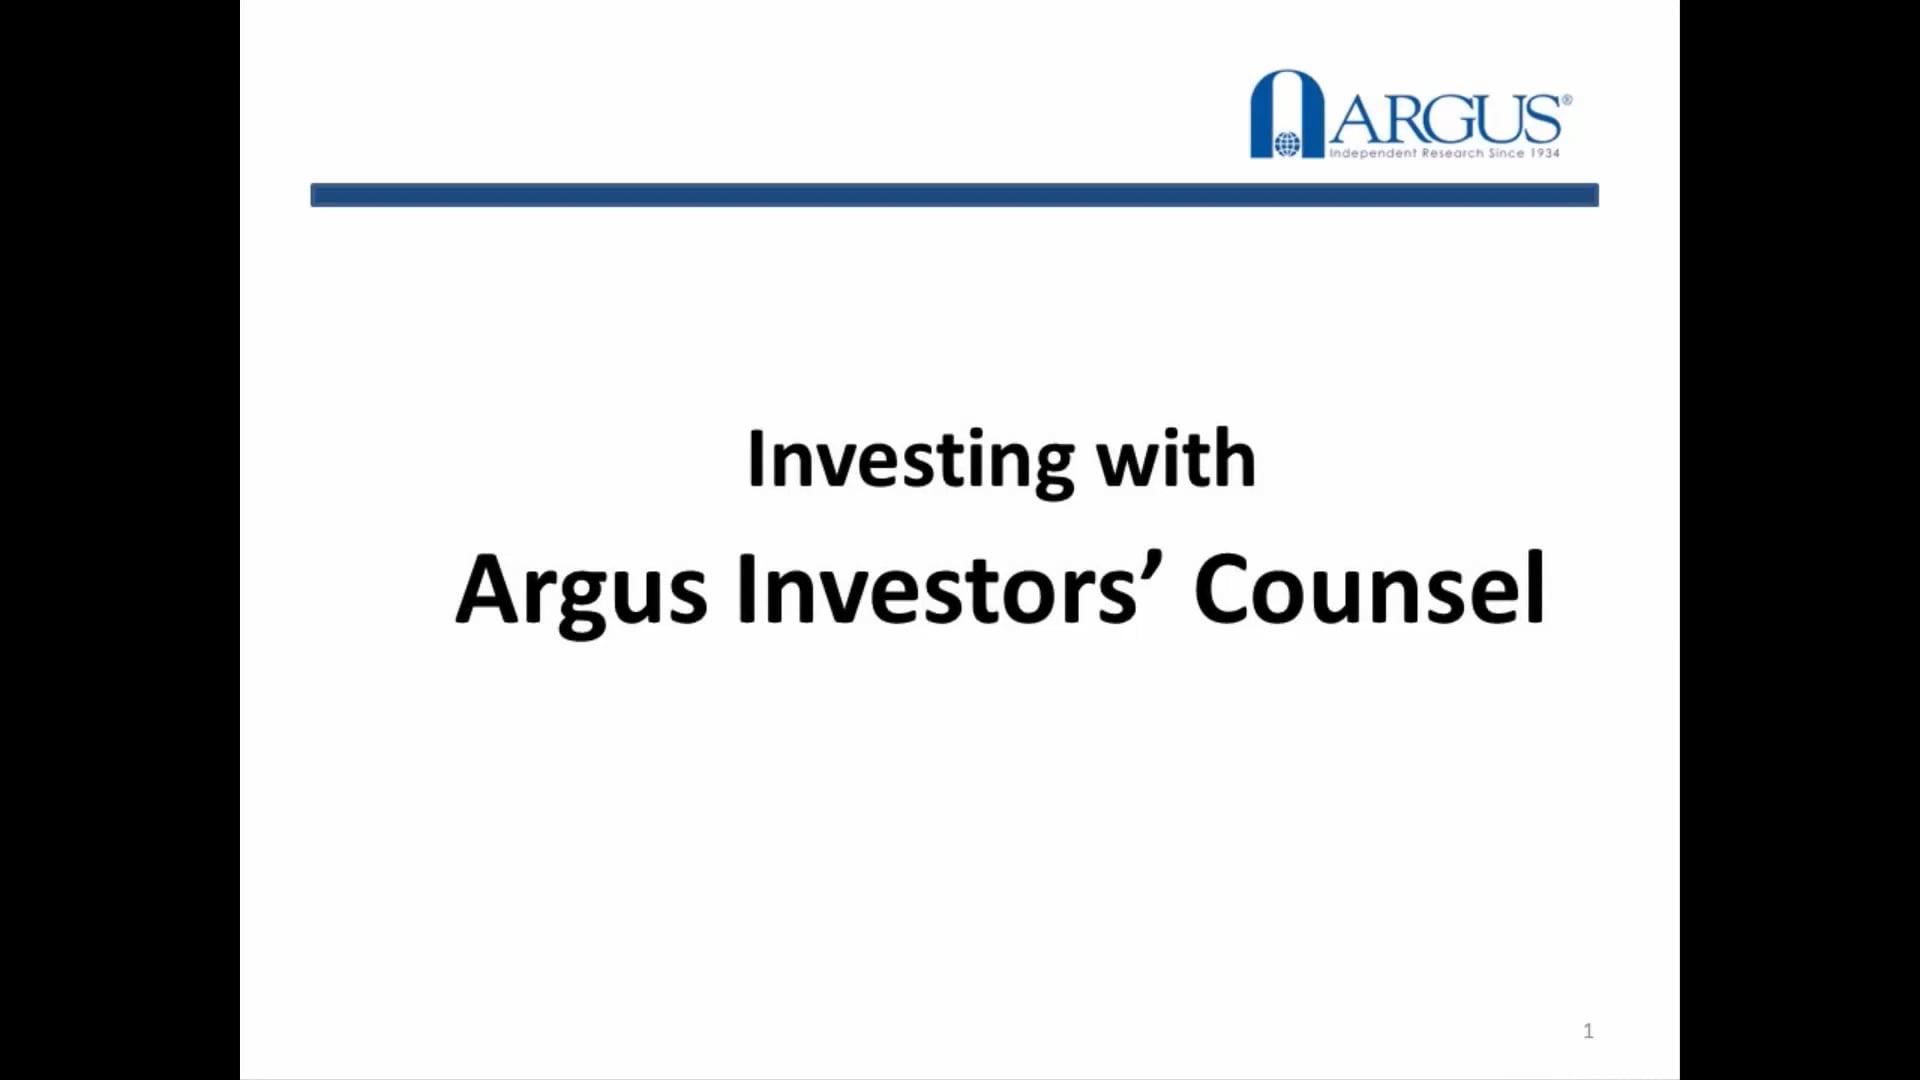 Investing with Argus Investors' Counsel